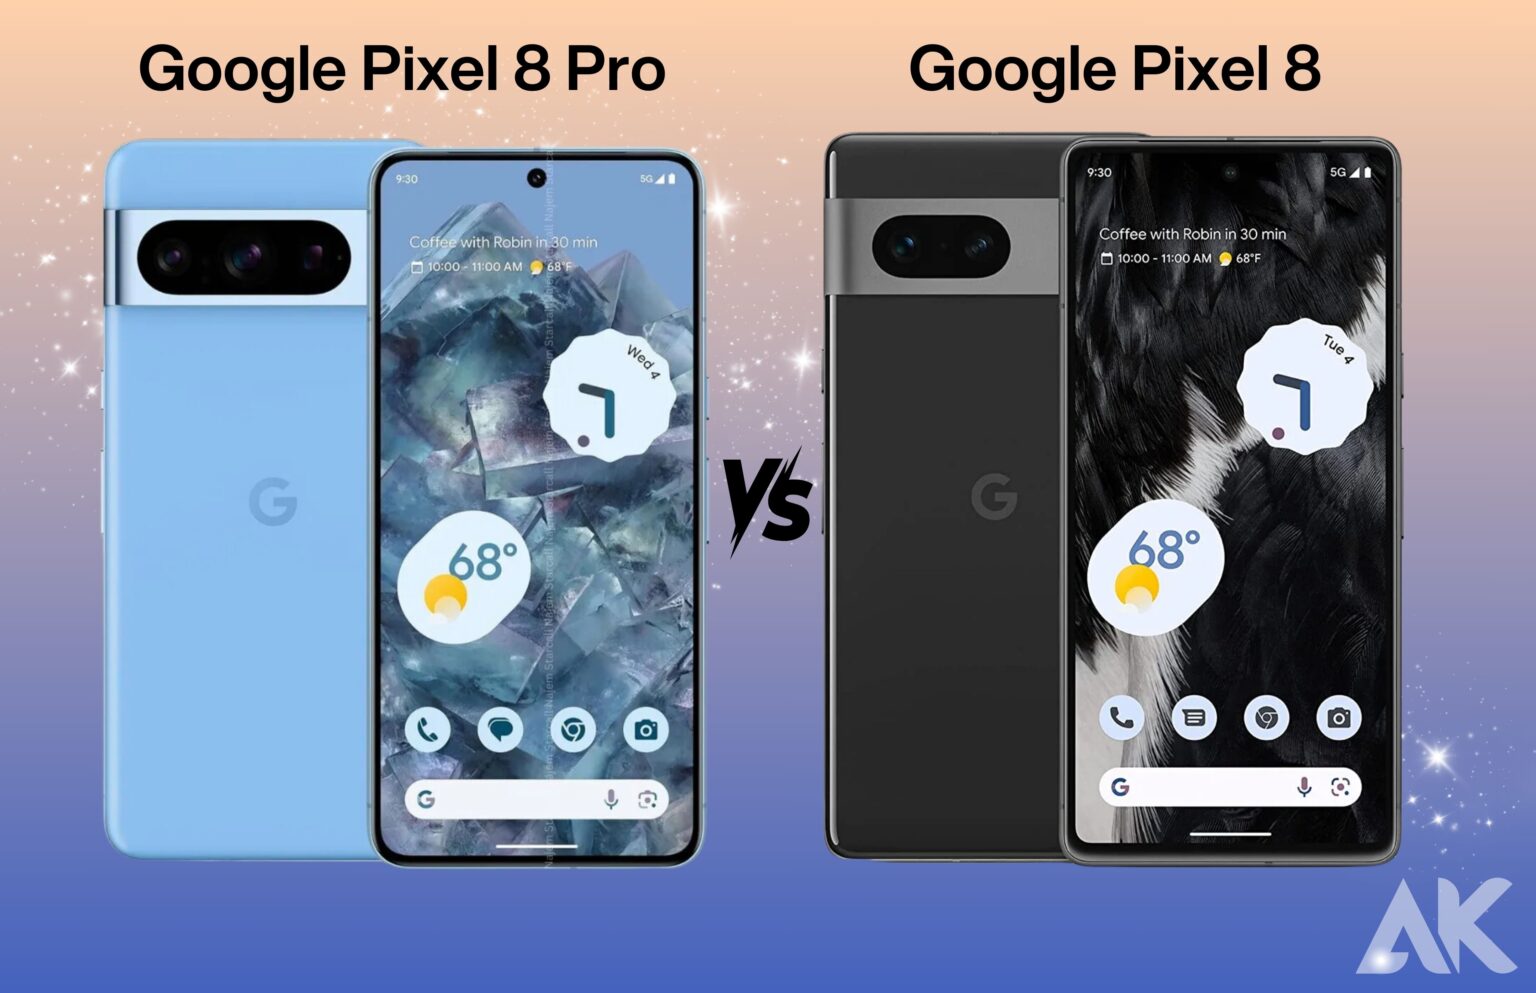 Google Pixel 8: The best Google Pixel phone for most people